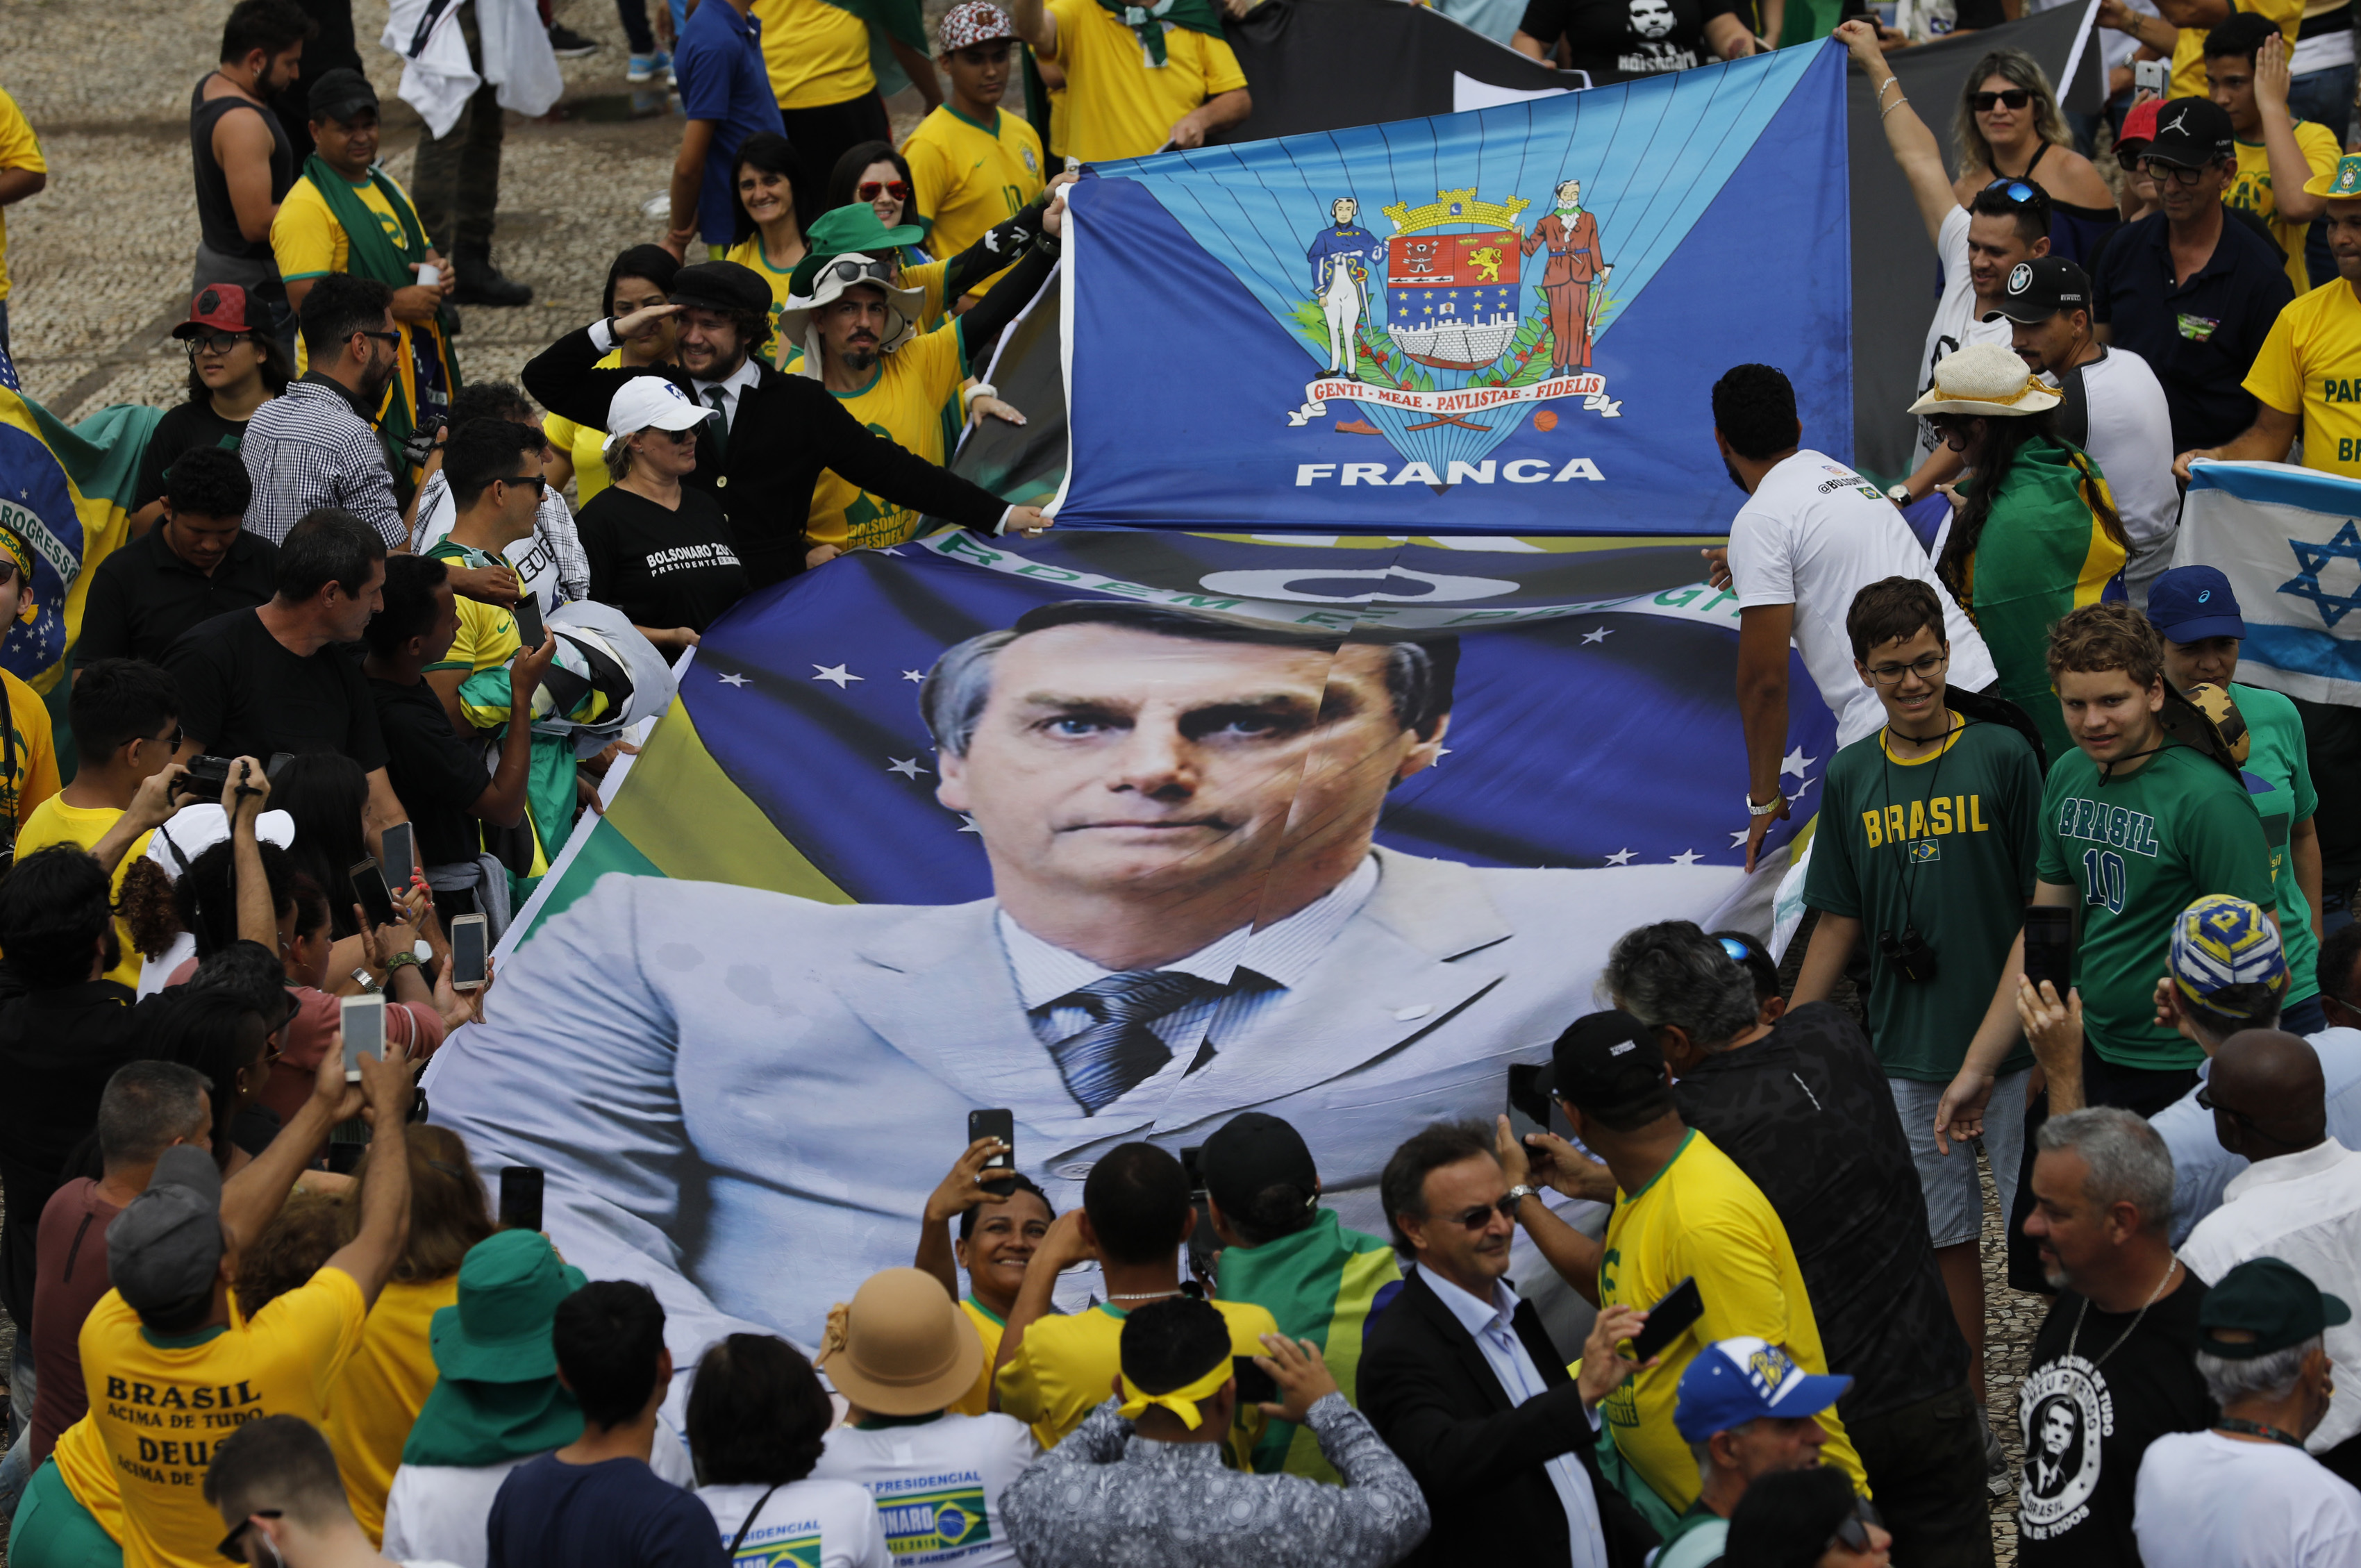 People hold a banner with a photo of Brazil's former army captain Jair Bolsonaro before the swearing-in ceremony, in front of the Planalto palace in Brasilia, Brail, Tuesday Jan. 1, 2019.  Once an outsider mocked by fellow lawmakers for his far-right positions, constant use of expletives and even casual dressing, Bolsonaro is taking office as Brazil's president Tuesday. (AP Photo/Silvia Izquierdo)